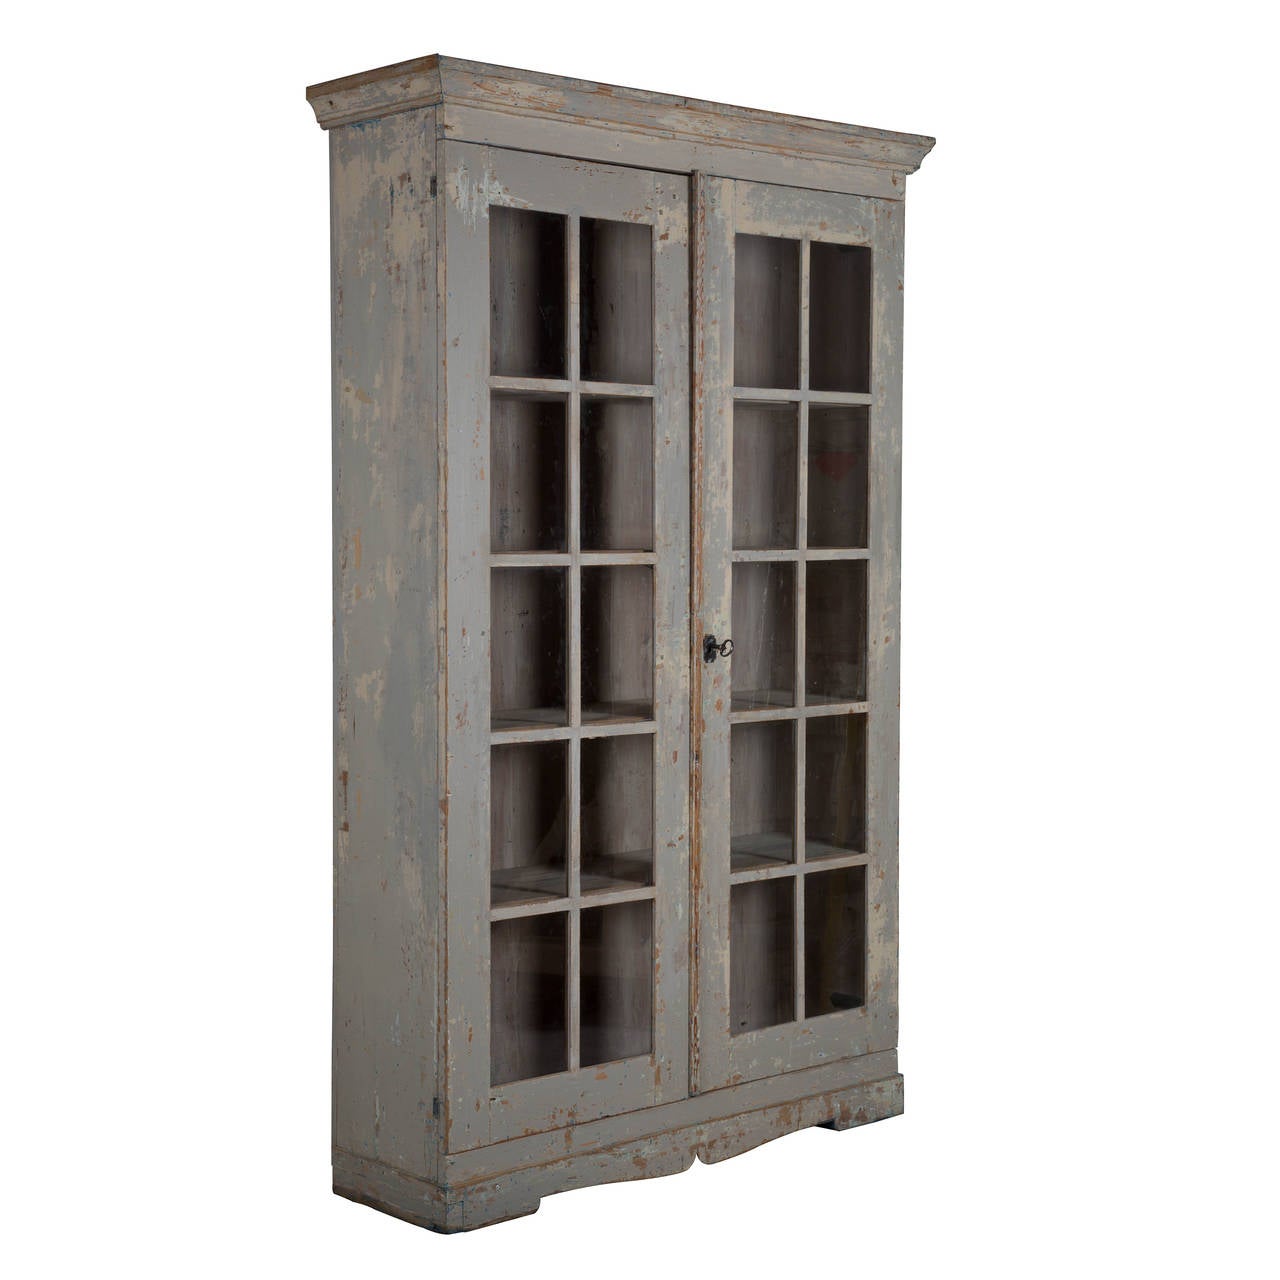 Late Gustavian glazed bookcase - scraped back to early paint.